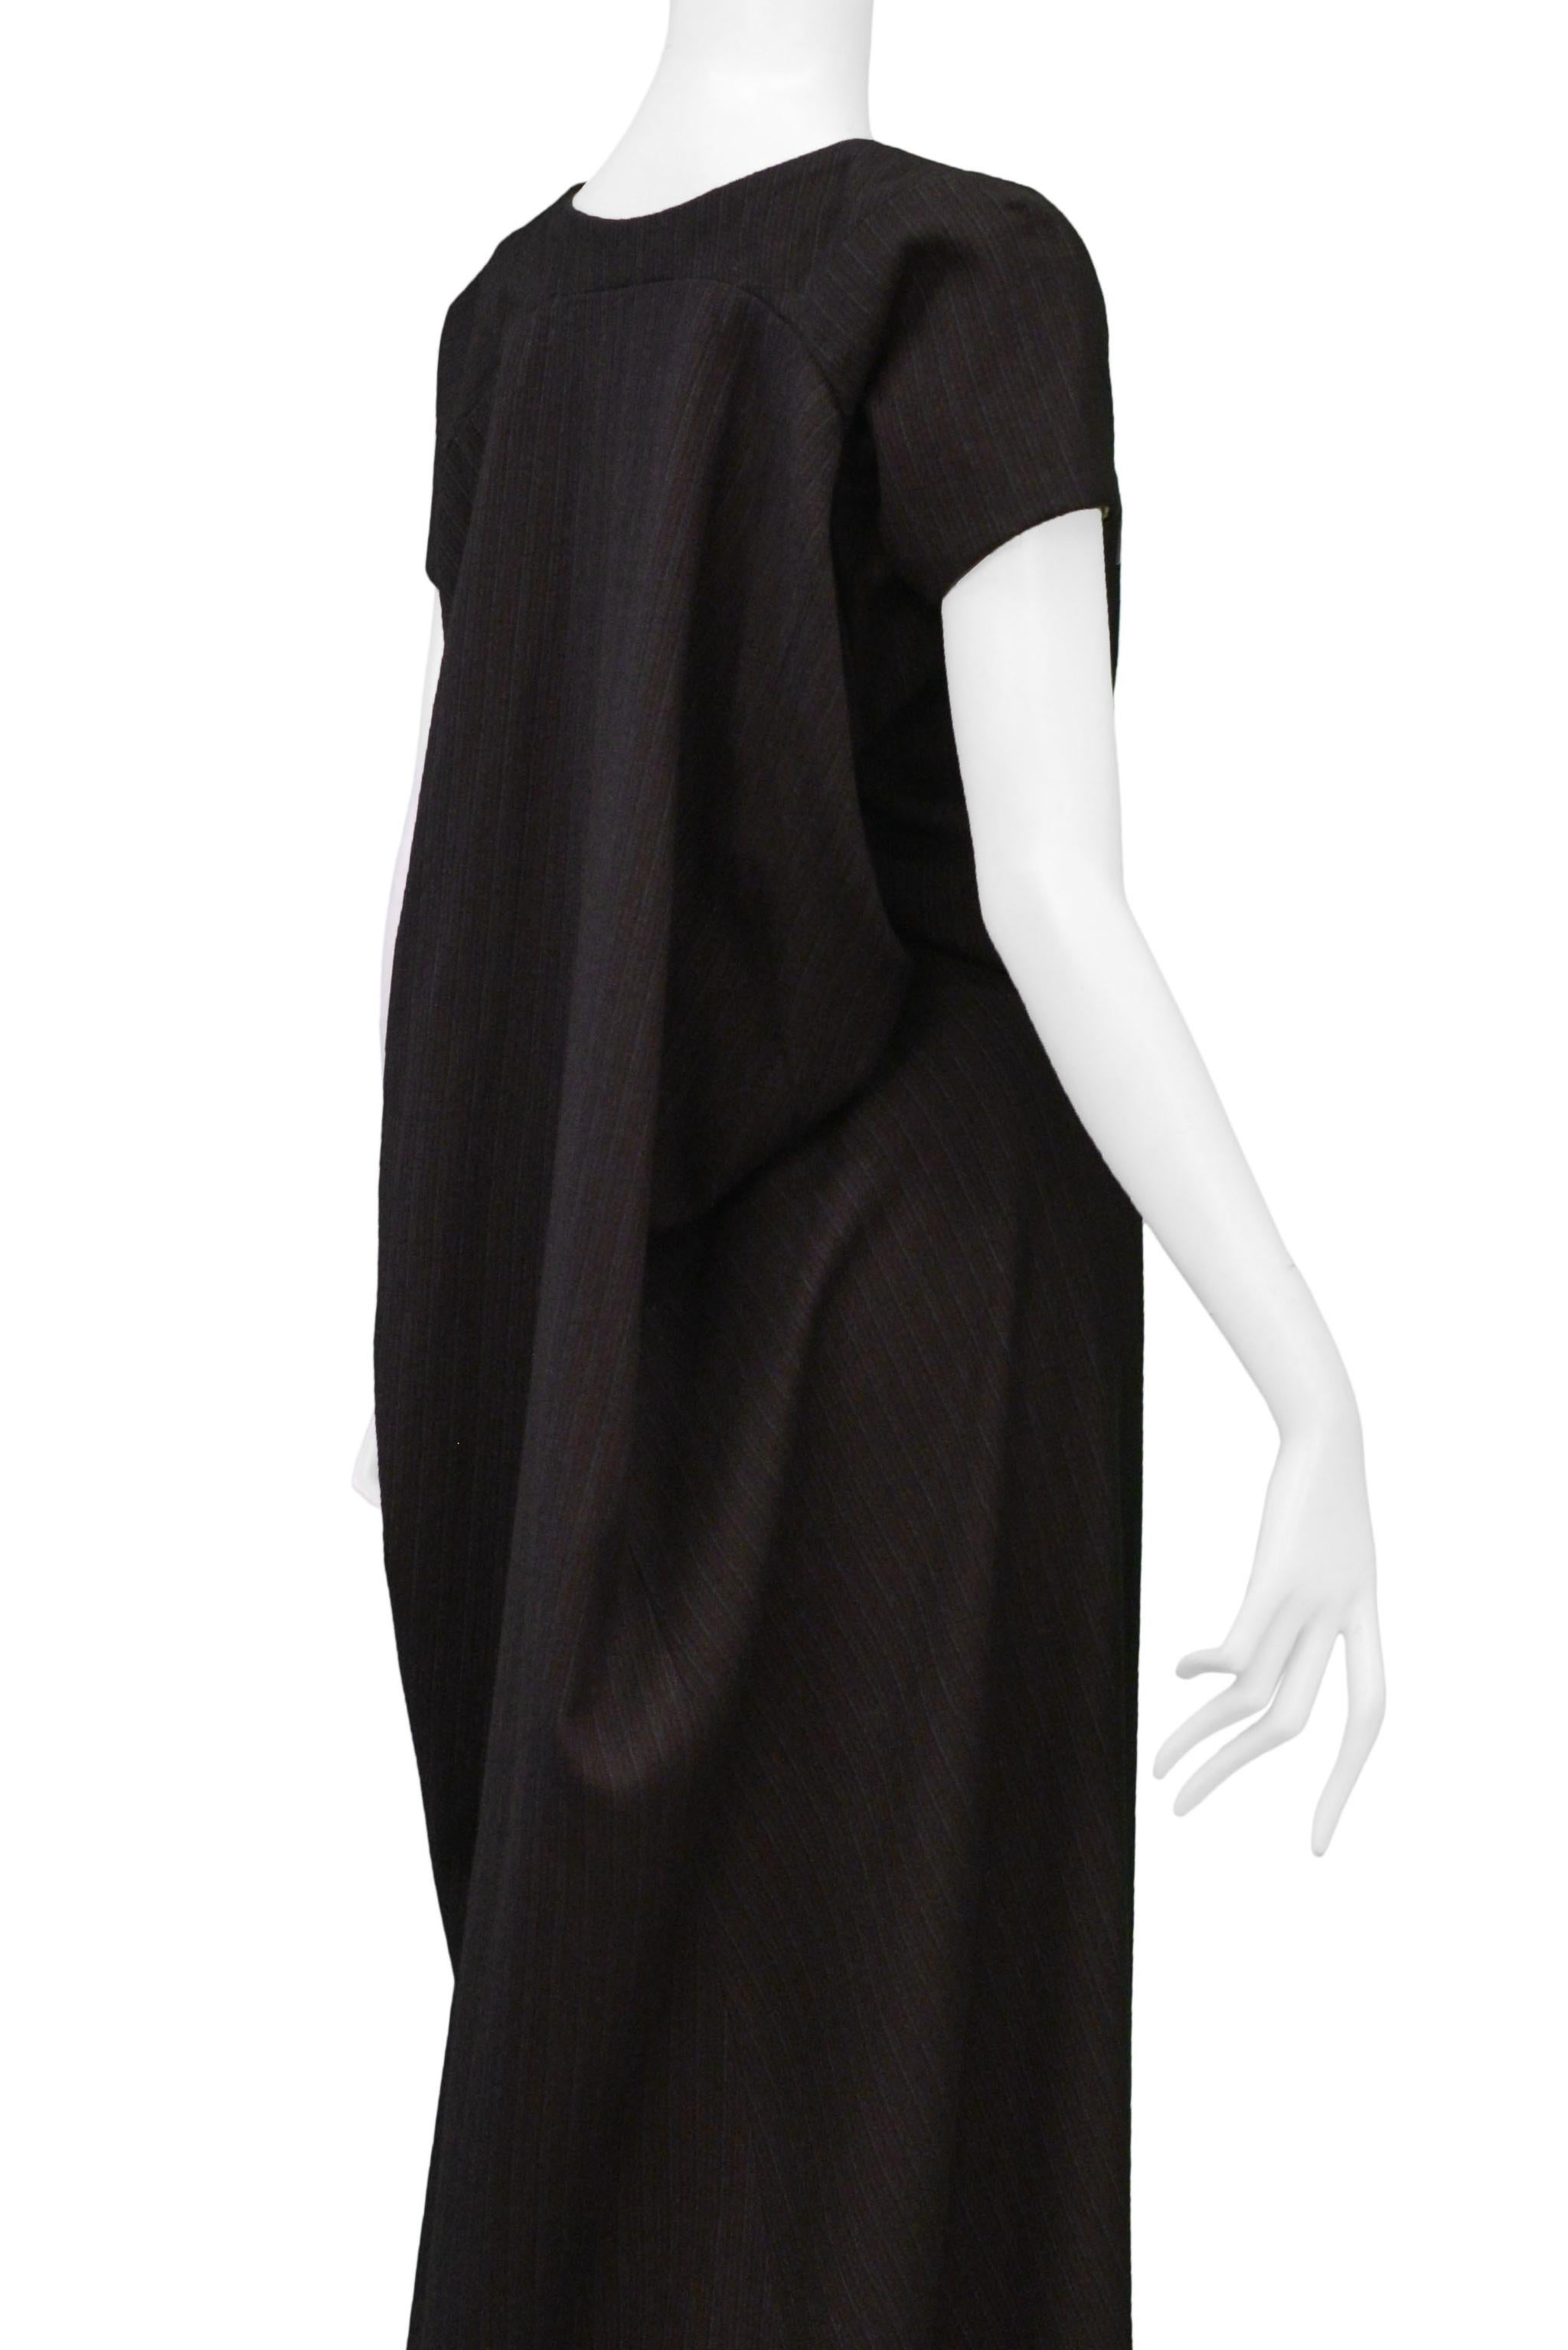 Junya Watanabe Brown Wool Pinstripe Concept Maxi Dress 1996 In Excellent Condition For Sale In Los Angeles, CA